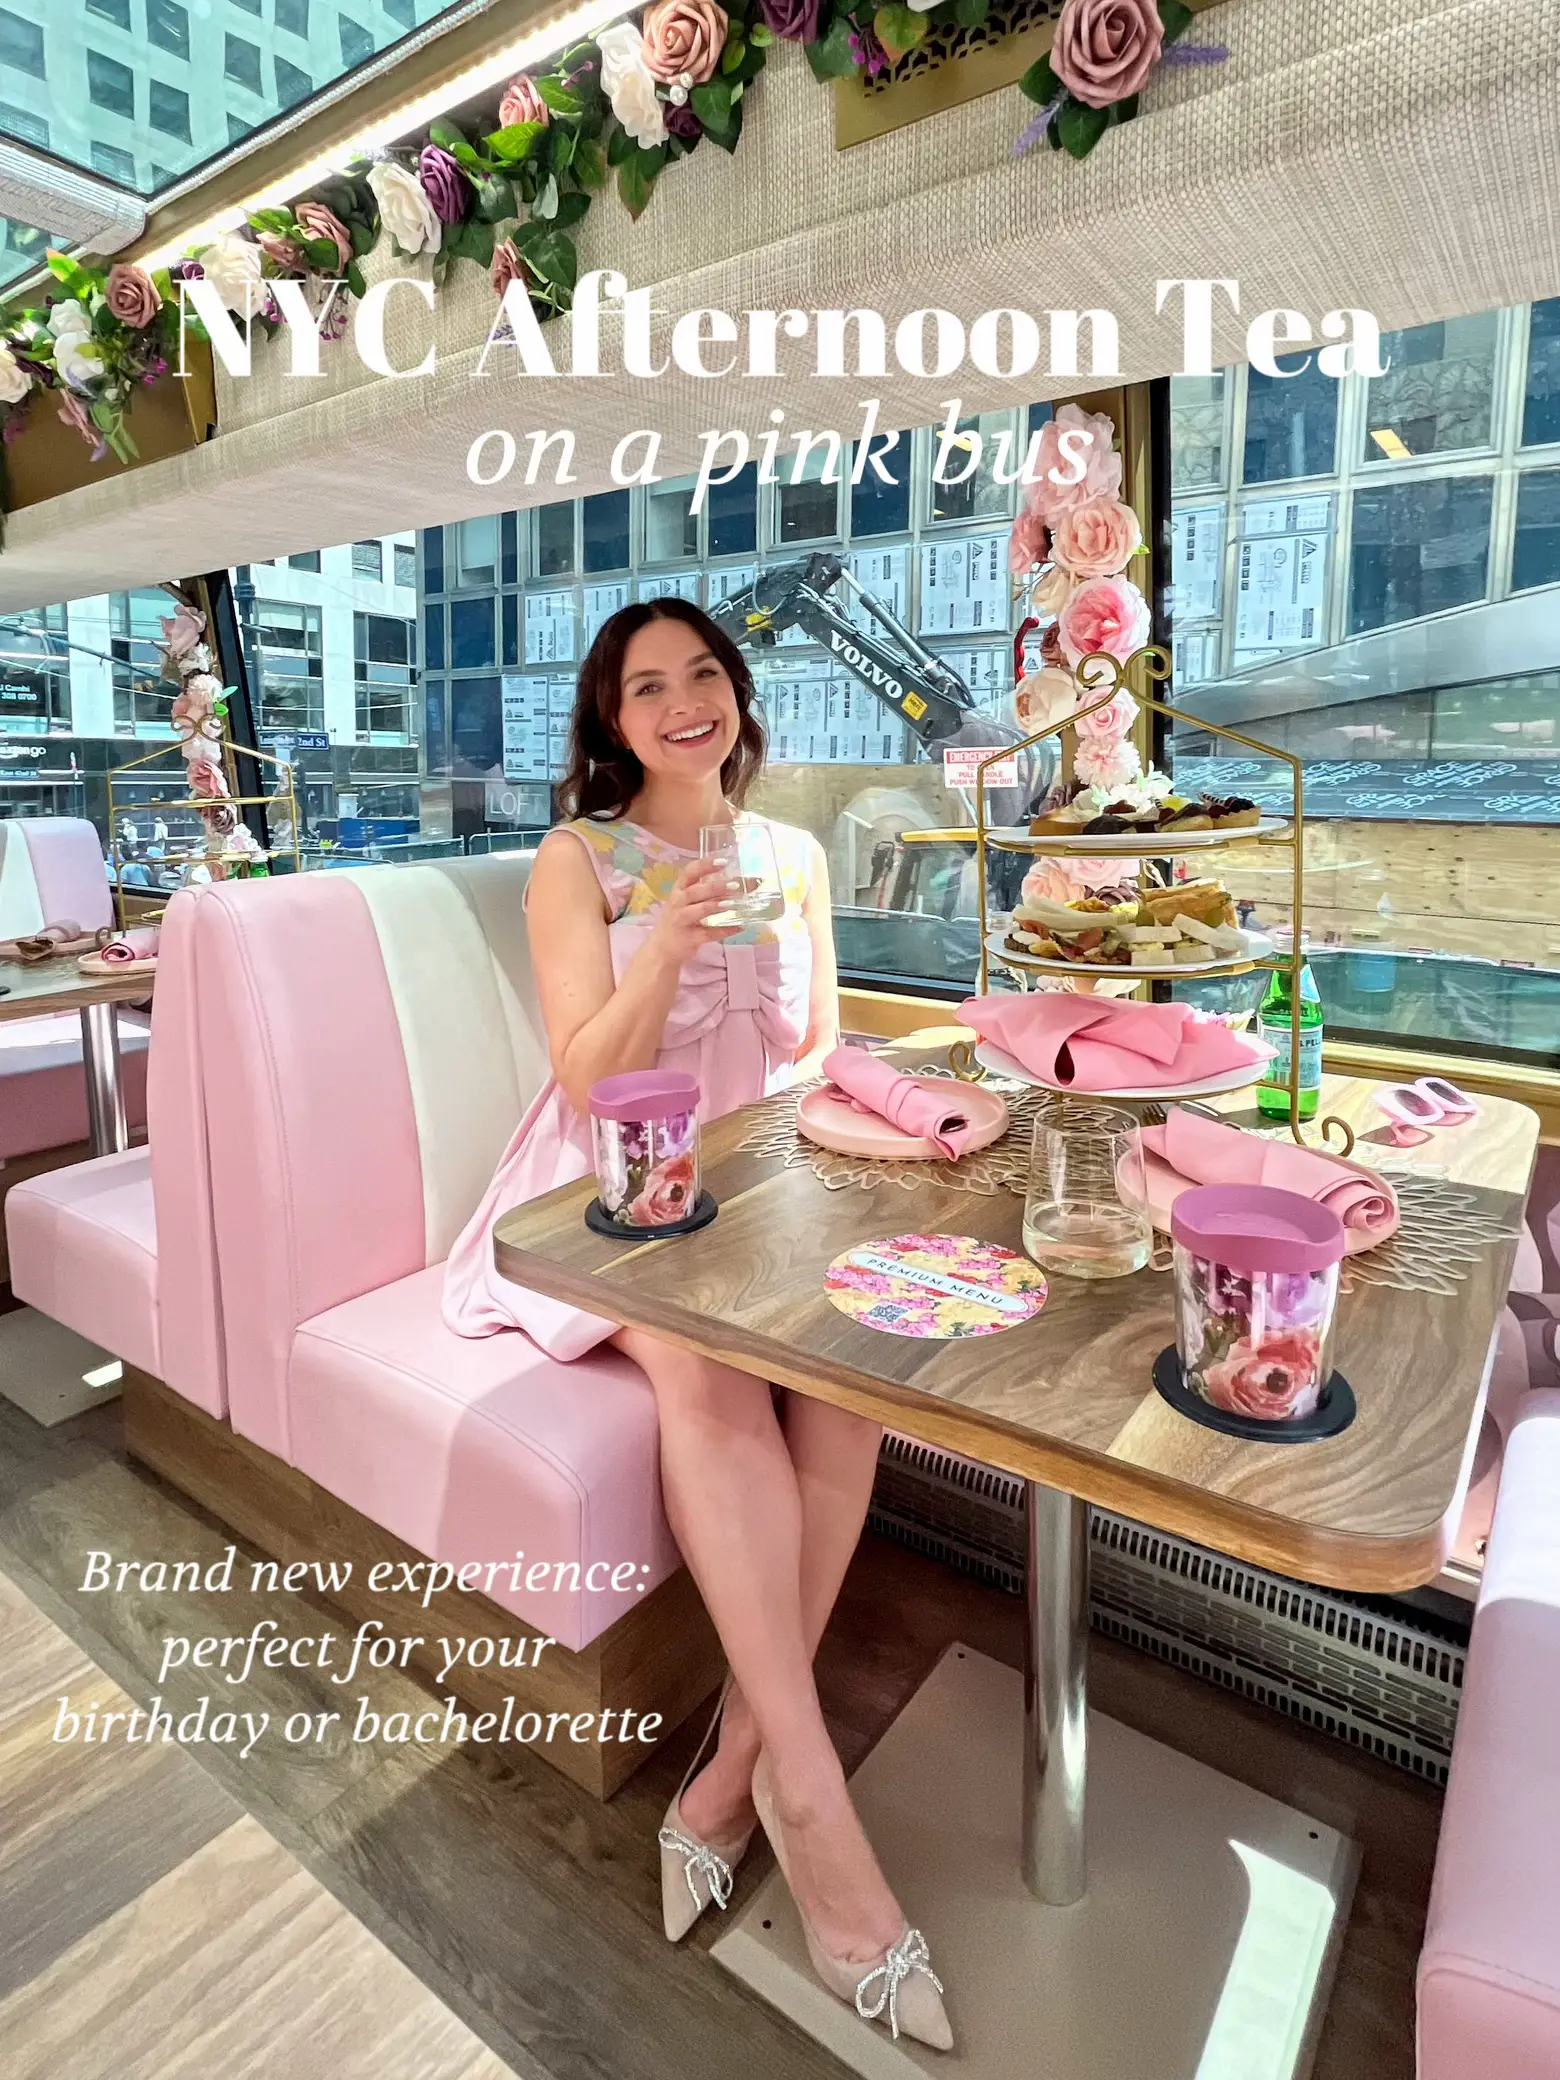 Afternoon Tea Bus Tour in NYC's images